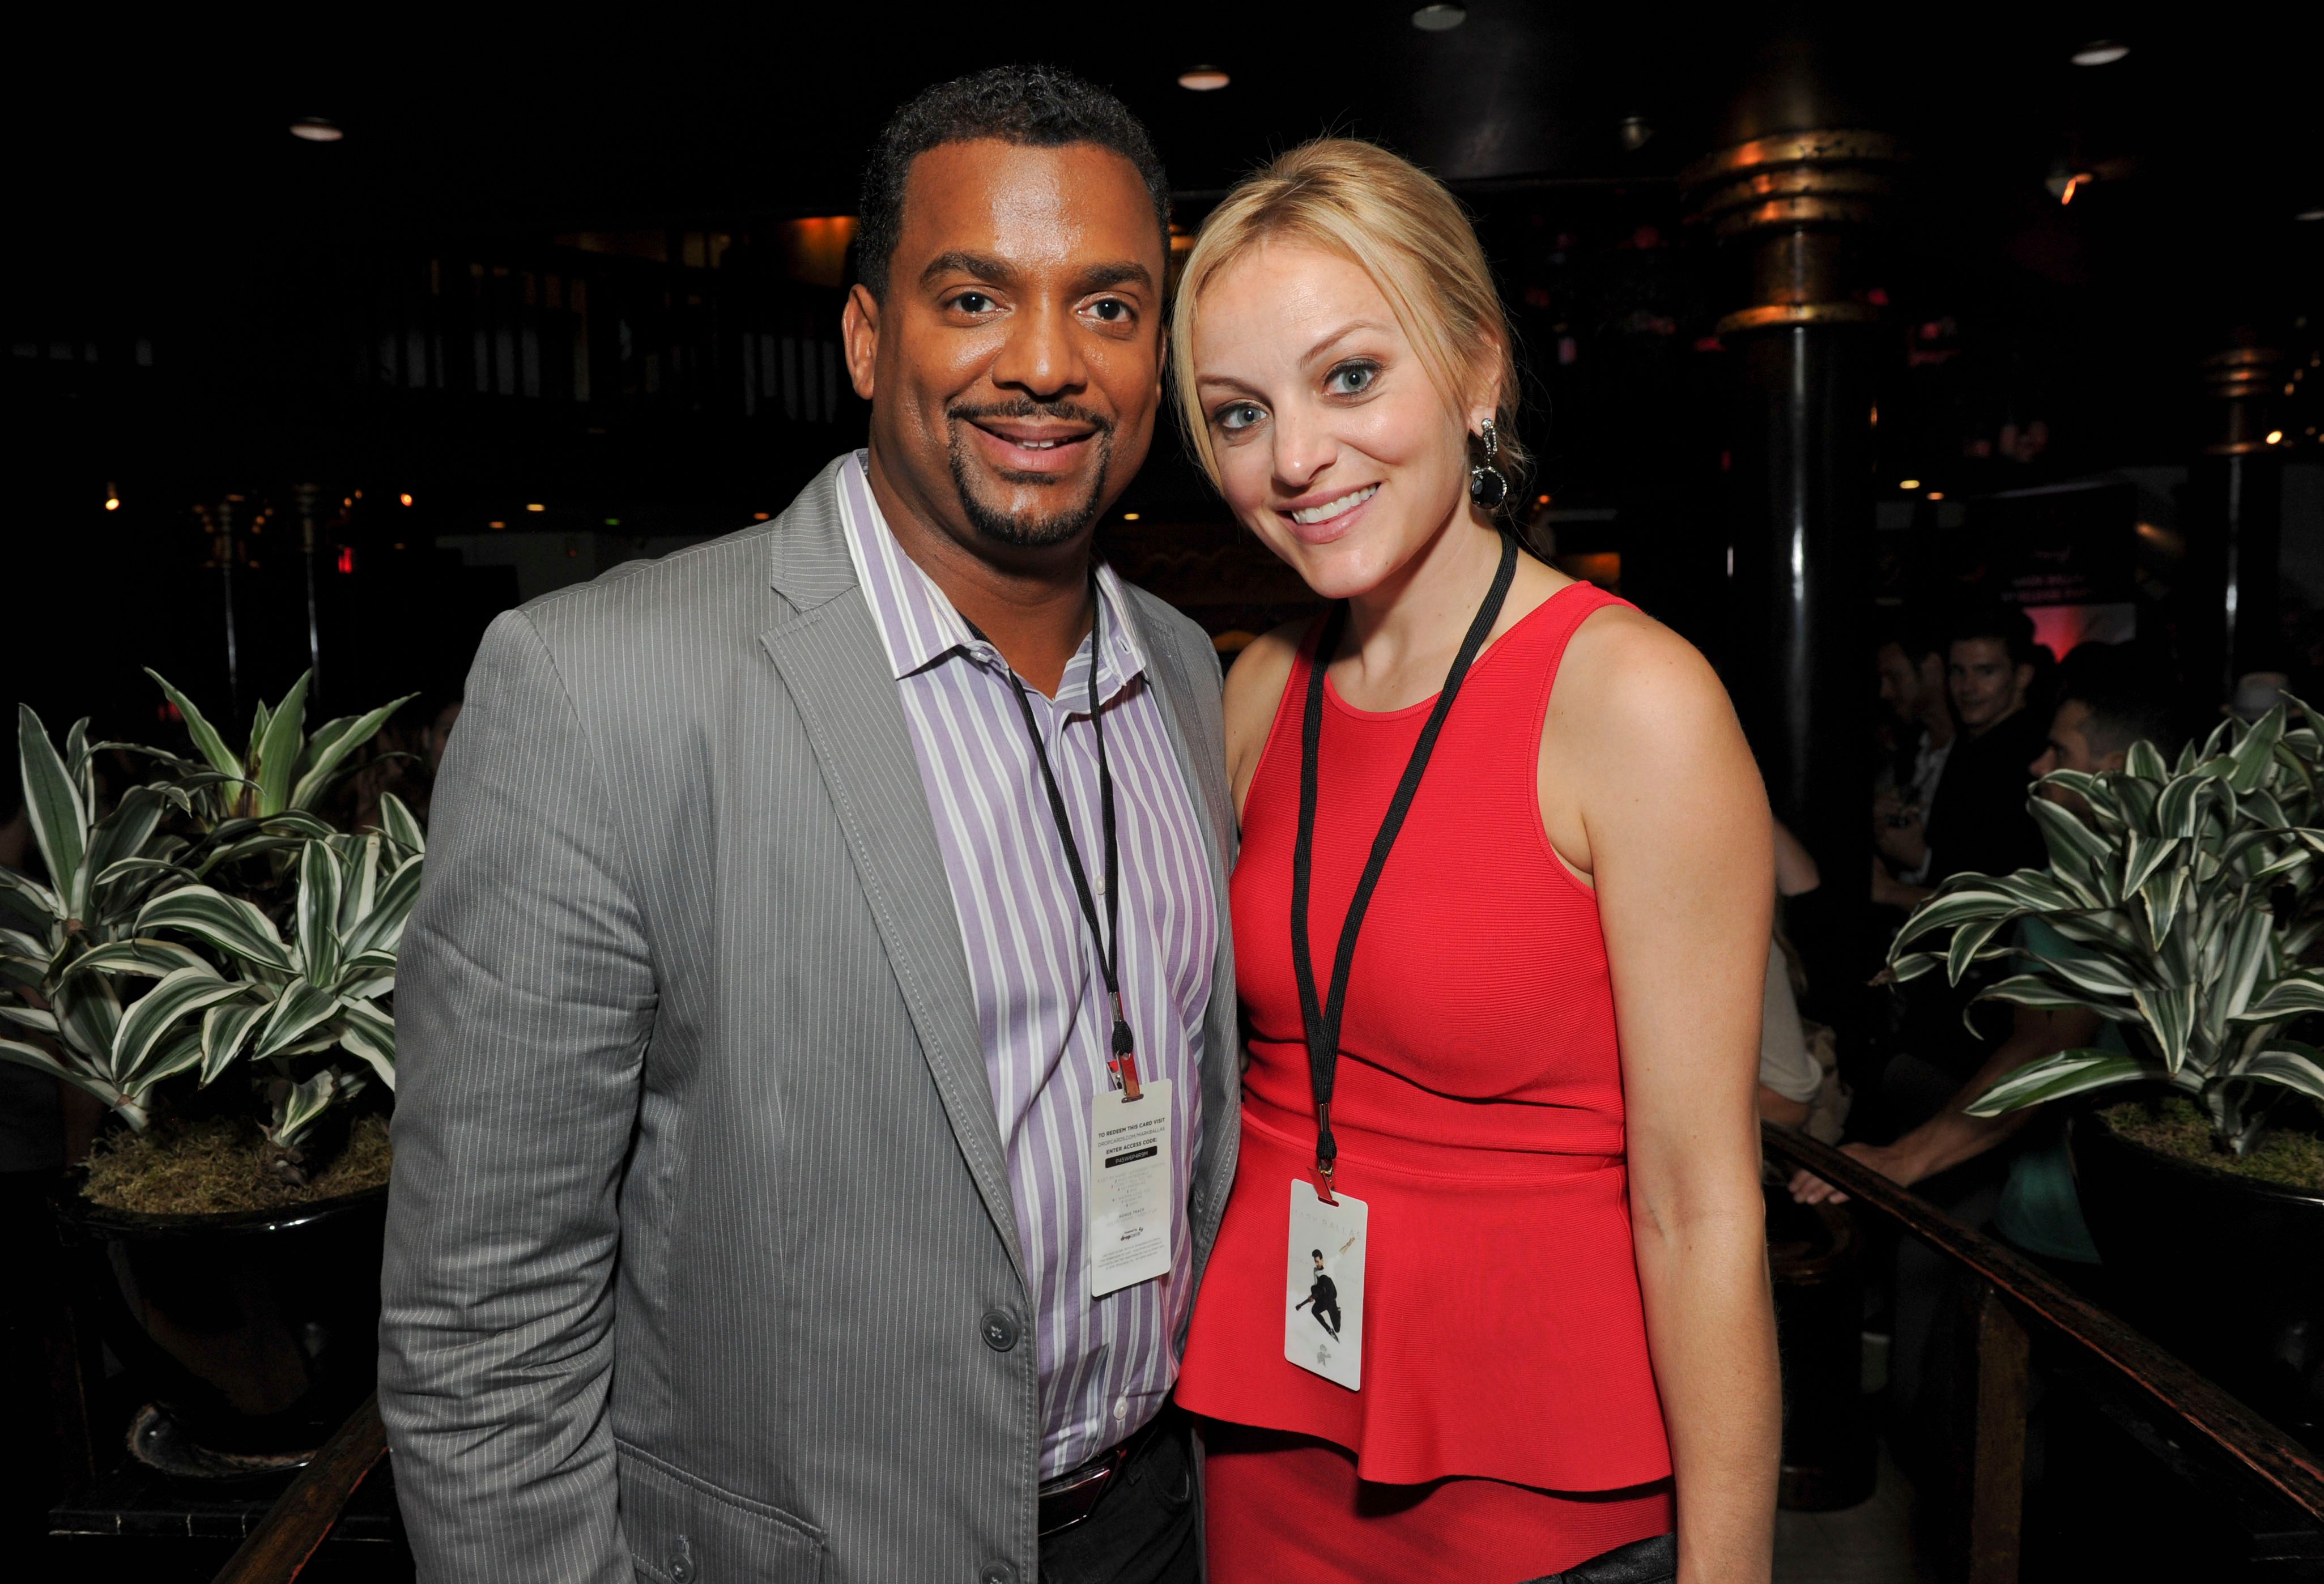 Alfonso Ribeiro and his wife attending Mark Ballas Debuts EP "Kicking Clouds" on September 16, 2014 in California. | Source: Getty Images